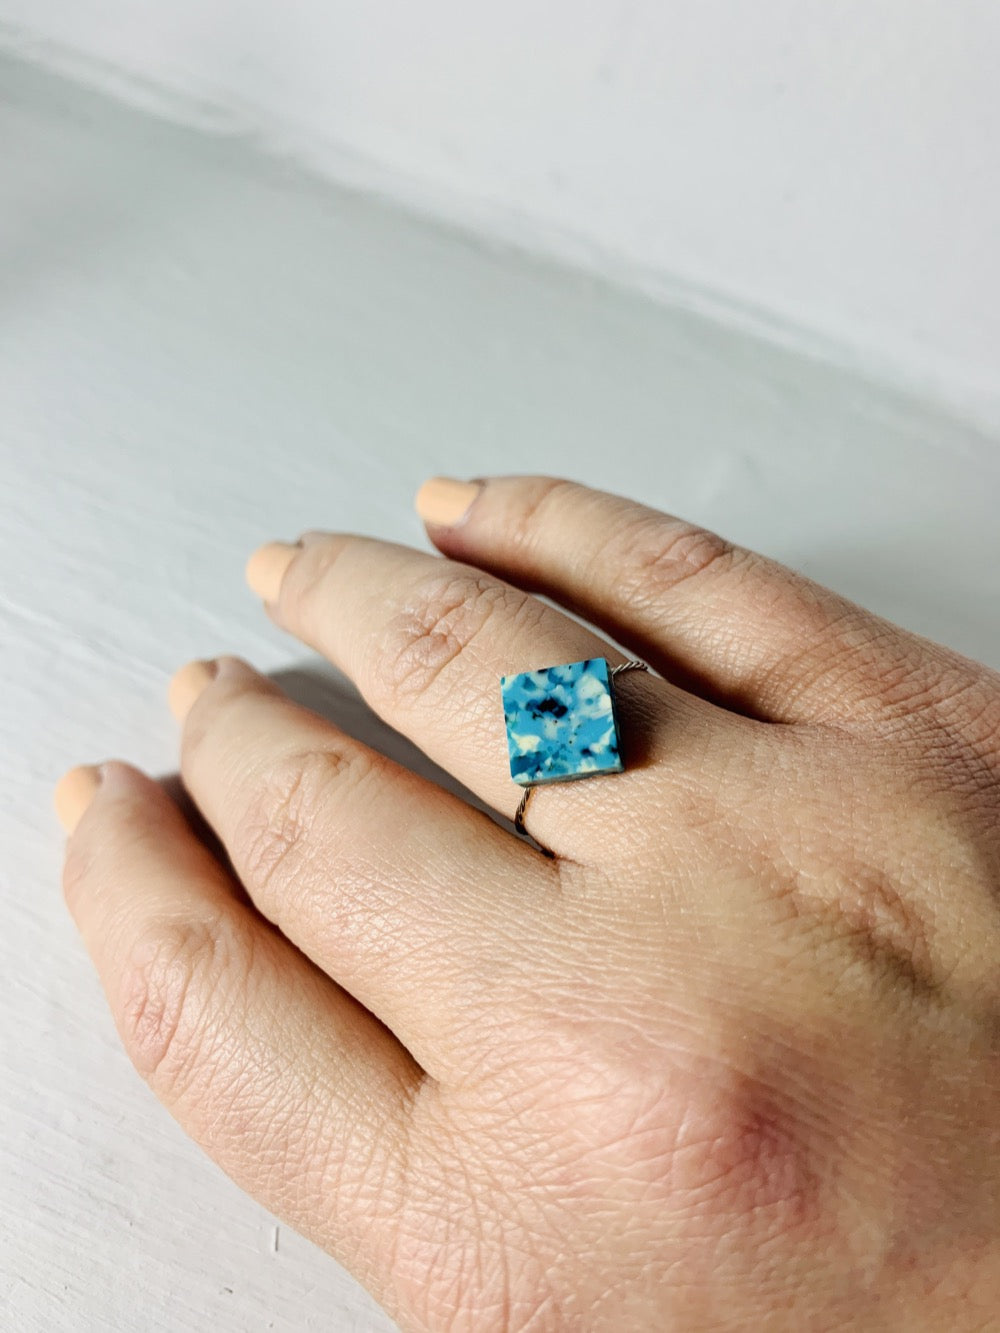 On a white background is someone's hand with a ring on their ring finger. The ring has a thin twisted metal band and a smooth square charm in the middle. The charm is made with recycled 3D prints with teal, blue, white, and black colors intermixed to be speckled like granite.